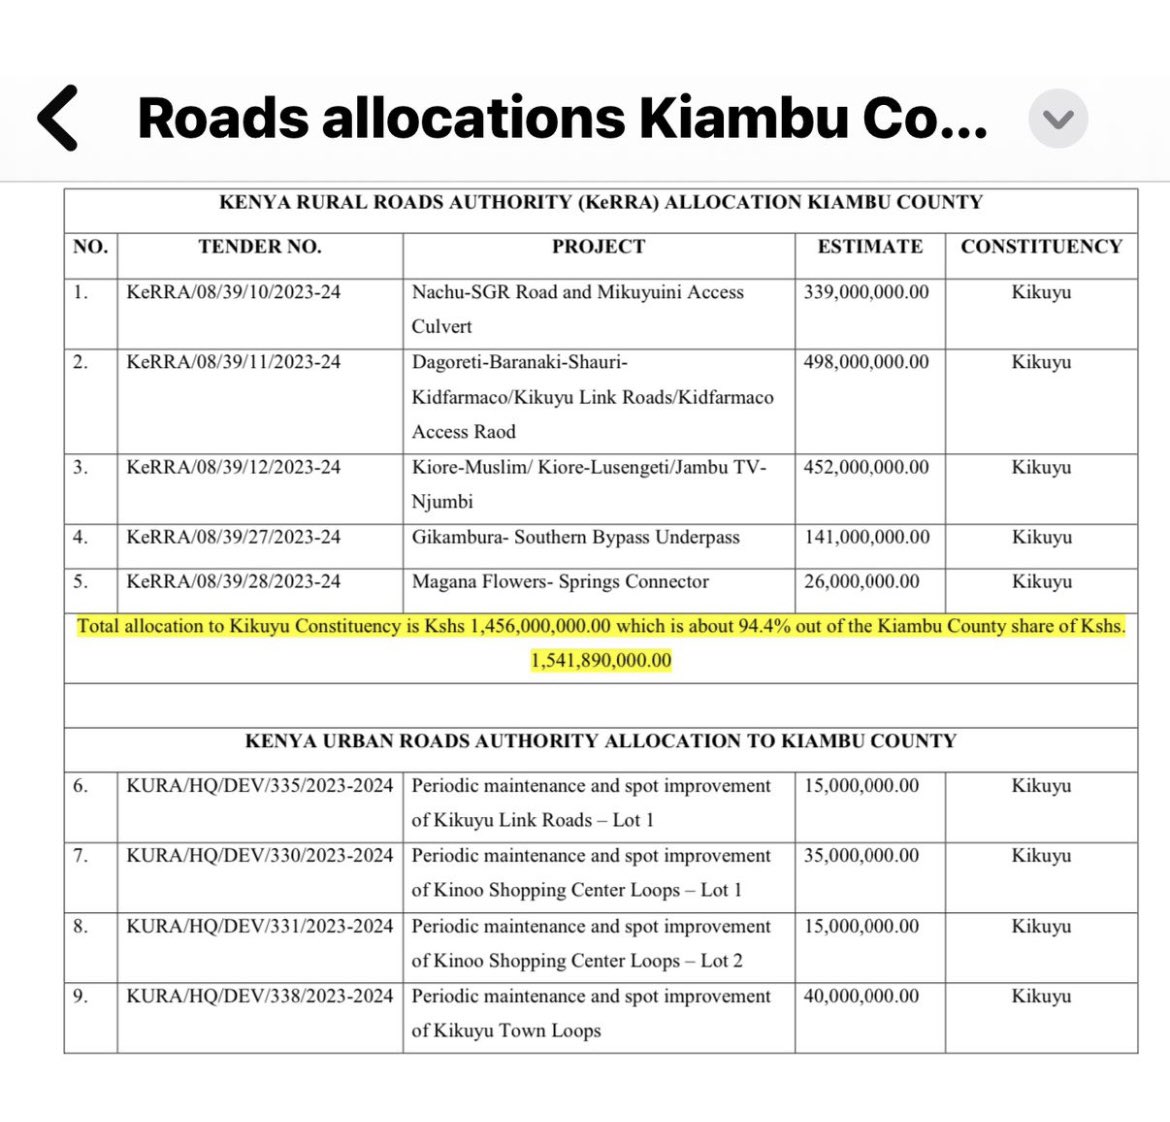 #Shareholders Nonsense, One Constituency (Kikuyu) gets Kshs I.5Billion, While Siaya County gets NOTHING! With 3 MPs safely bagged in KK! So Much For “Joining For Development “.., Awuoro